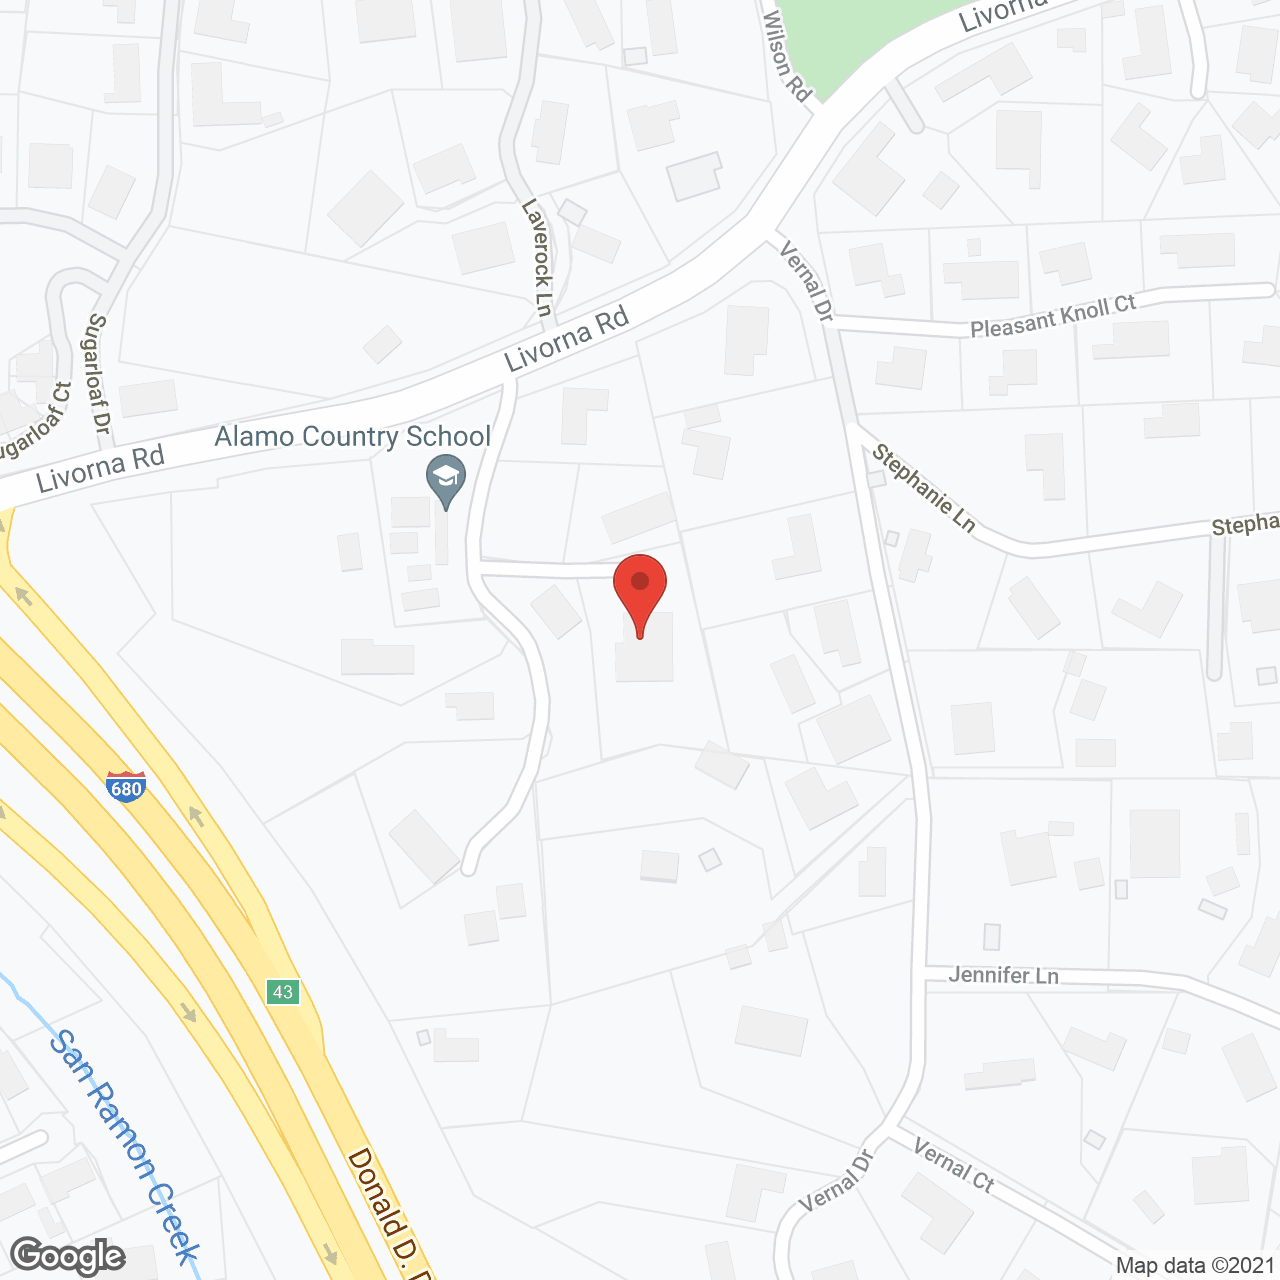 Stamm Care Home III in google map